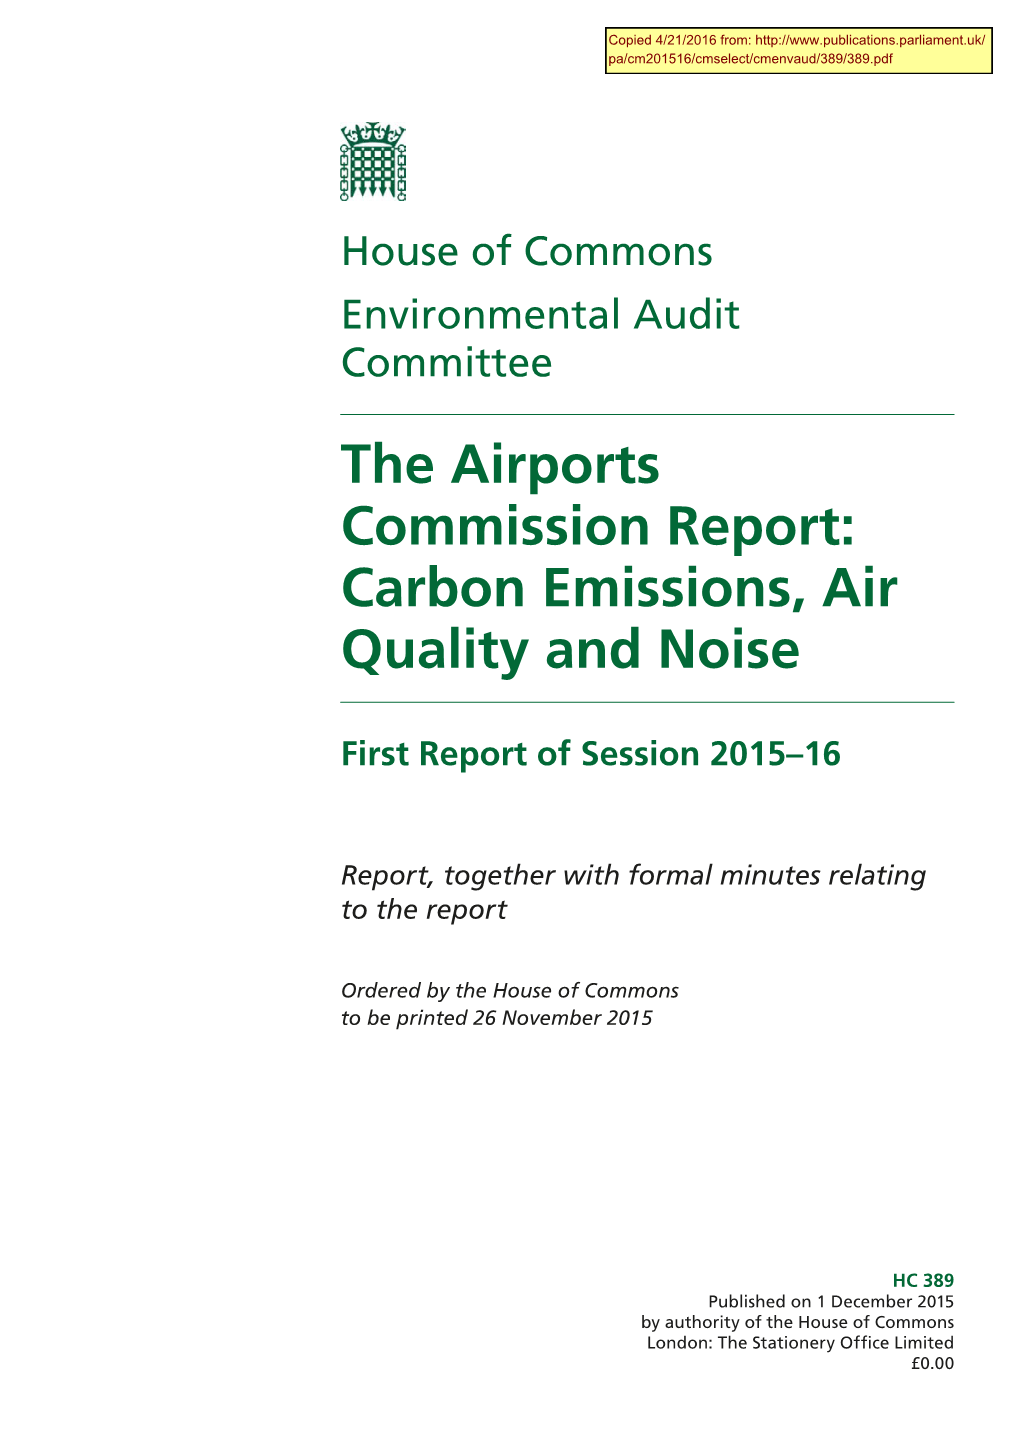 The Airports Commission Report: Carbon Emissions, Air Quality and Noise